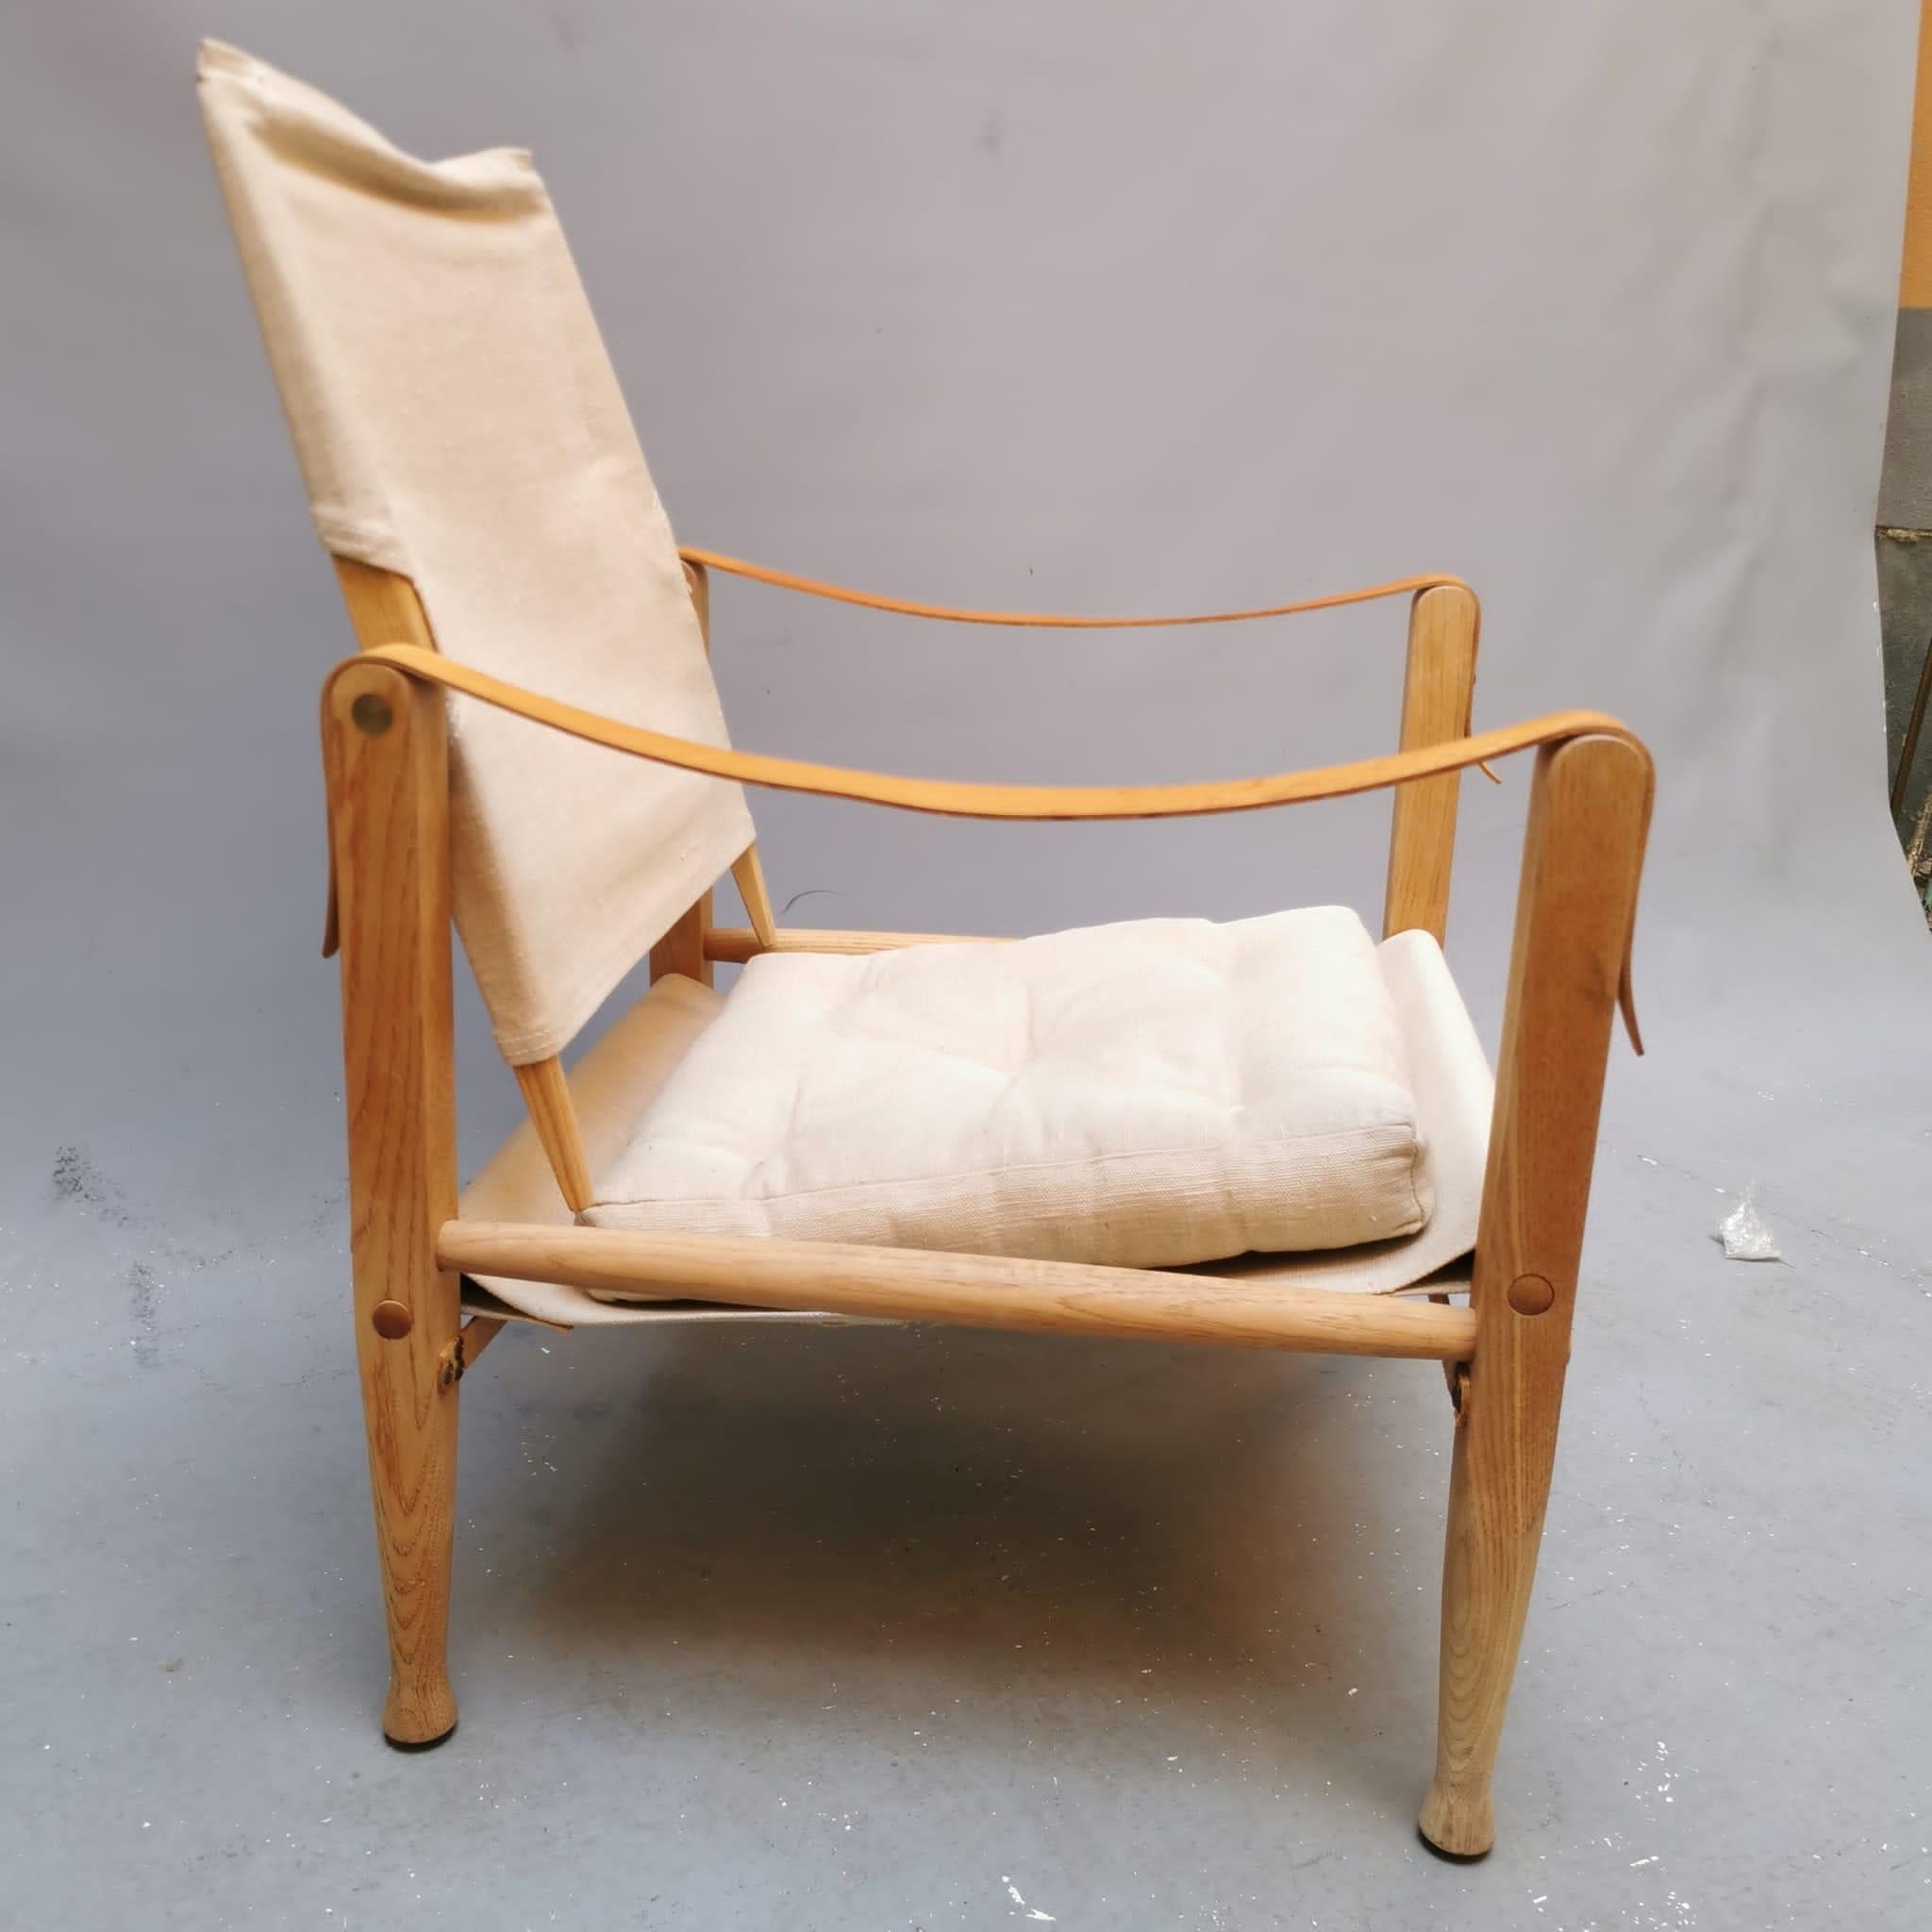 Kaare Klint’s KK47000 safari chair is a refinement of the chairs brought on an African safari by an American cinematographer and his wife. Klint noticed them in the couple’s photos. They were most likely based on Indian Roorkhee Chairs used by the